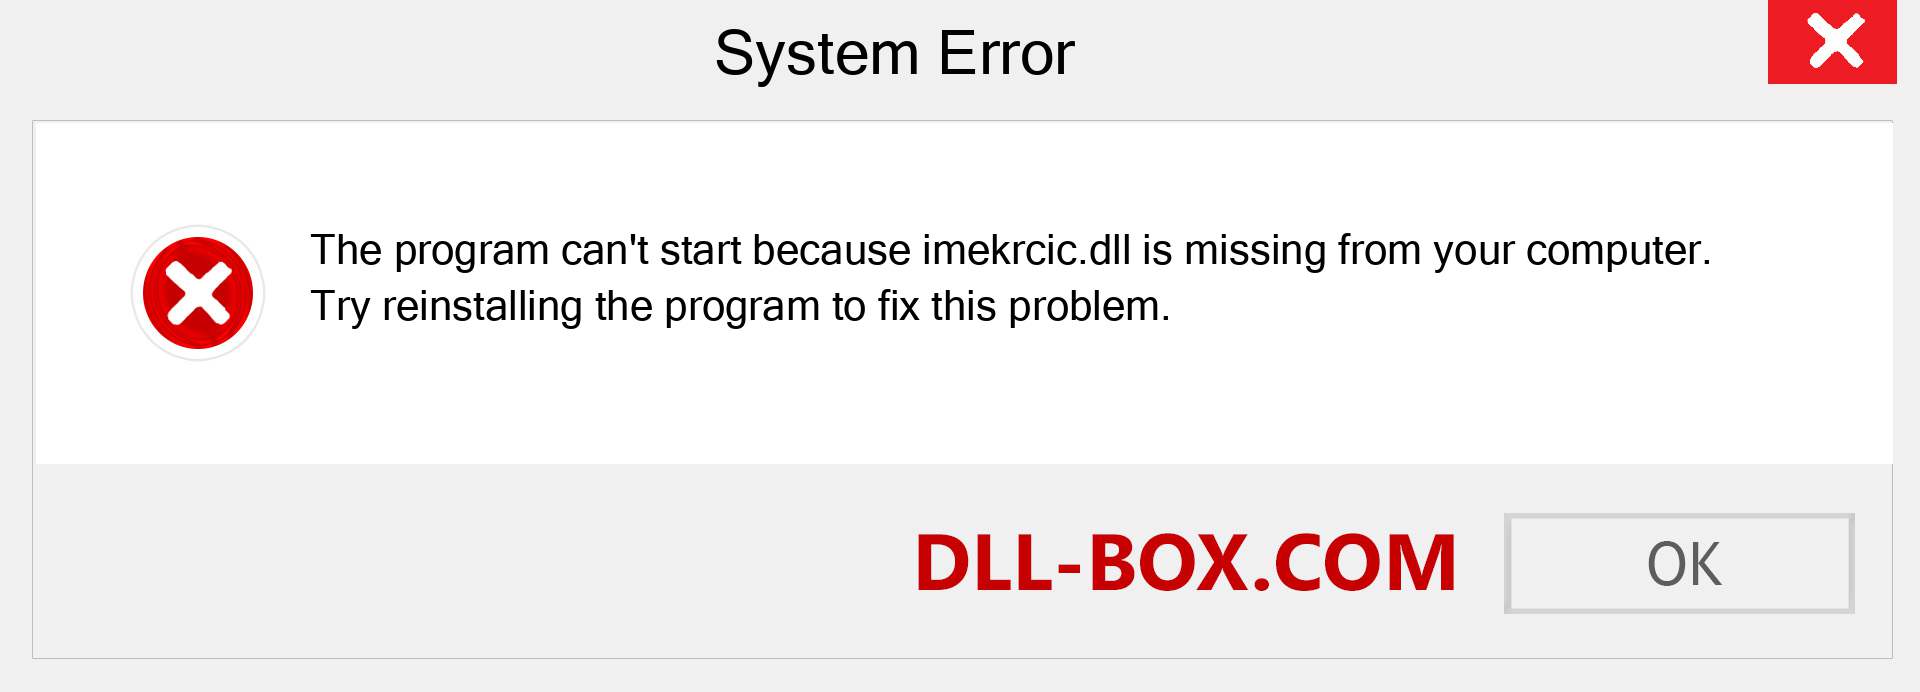  imekrcic.dll file is missing?. Download for Windows 7, 8, 10 - Fix  imekrcic dll Missing Error on Windows, photos, images